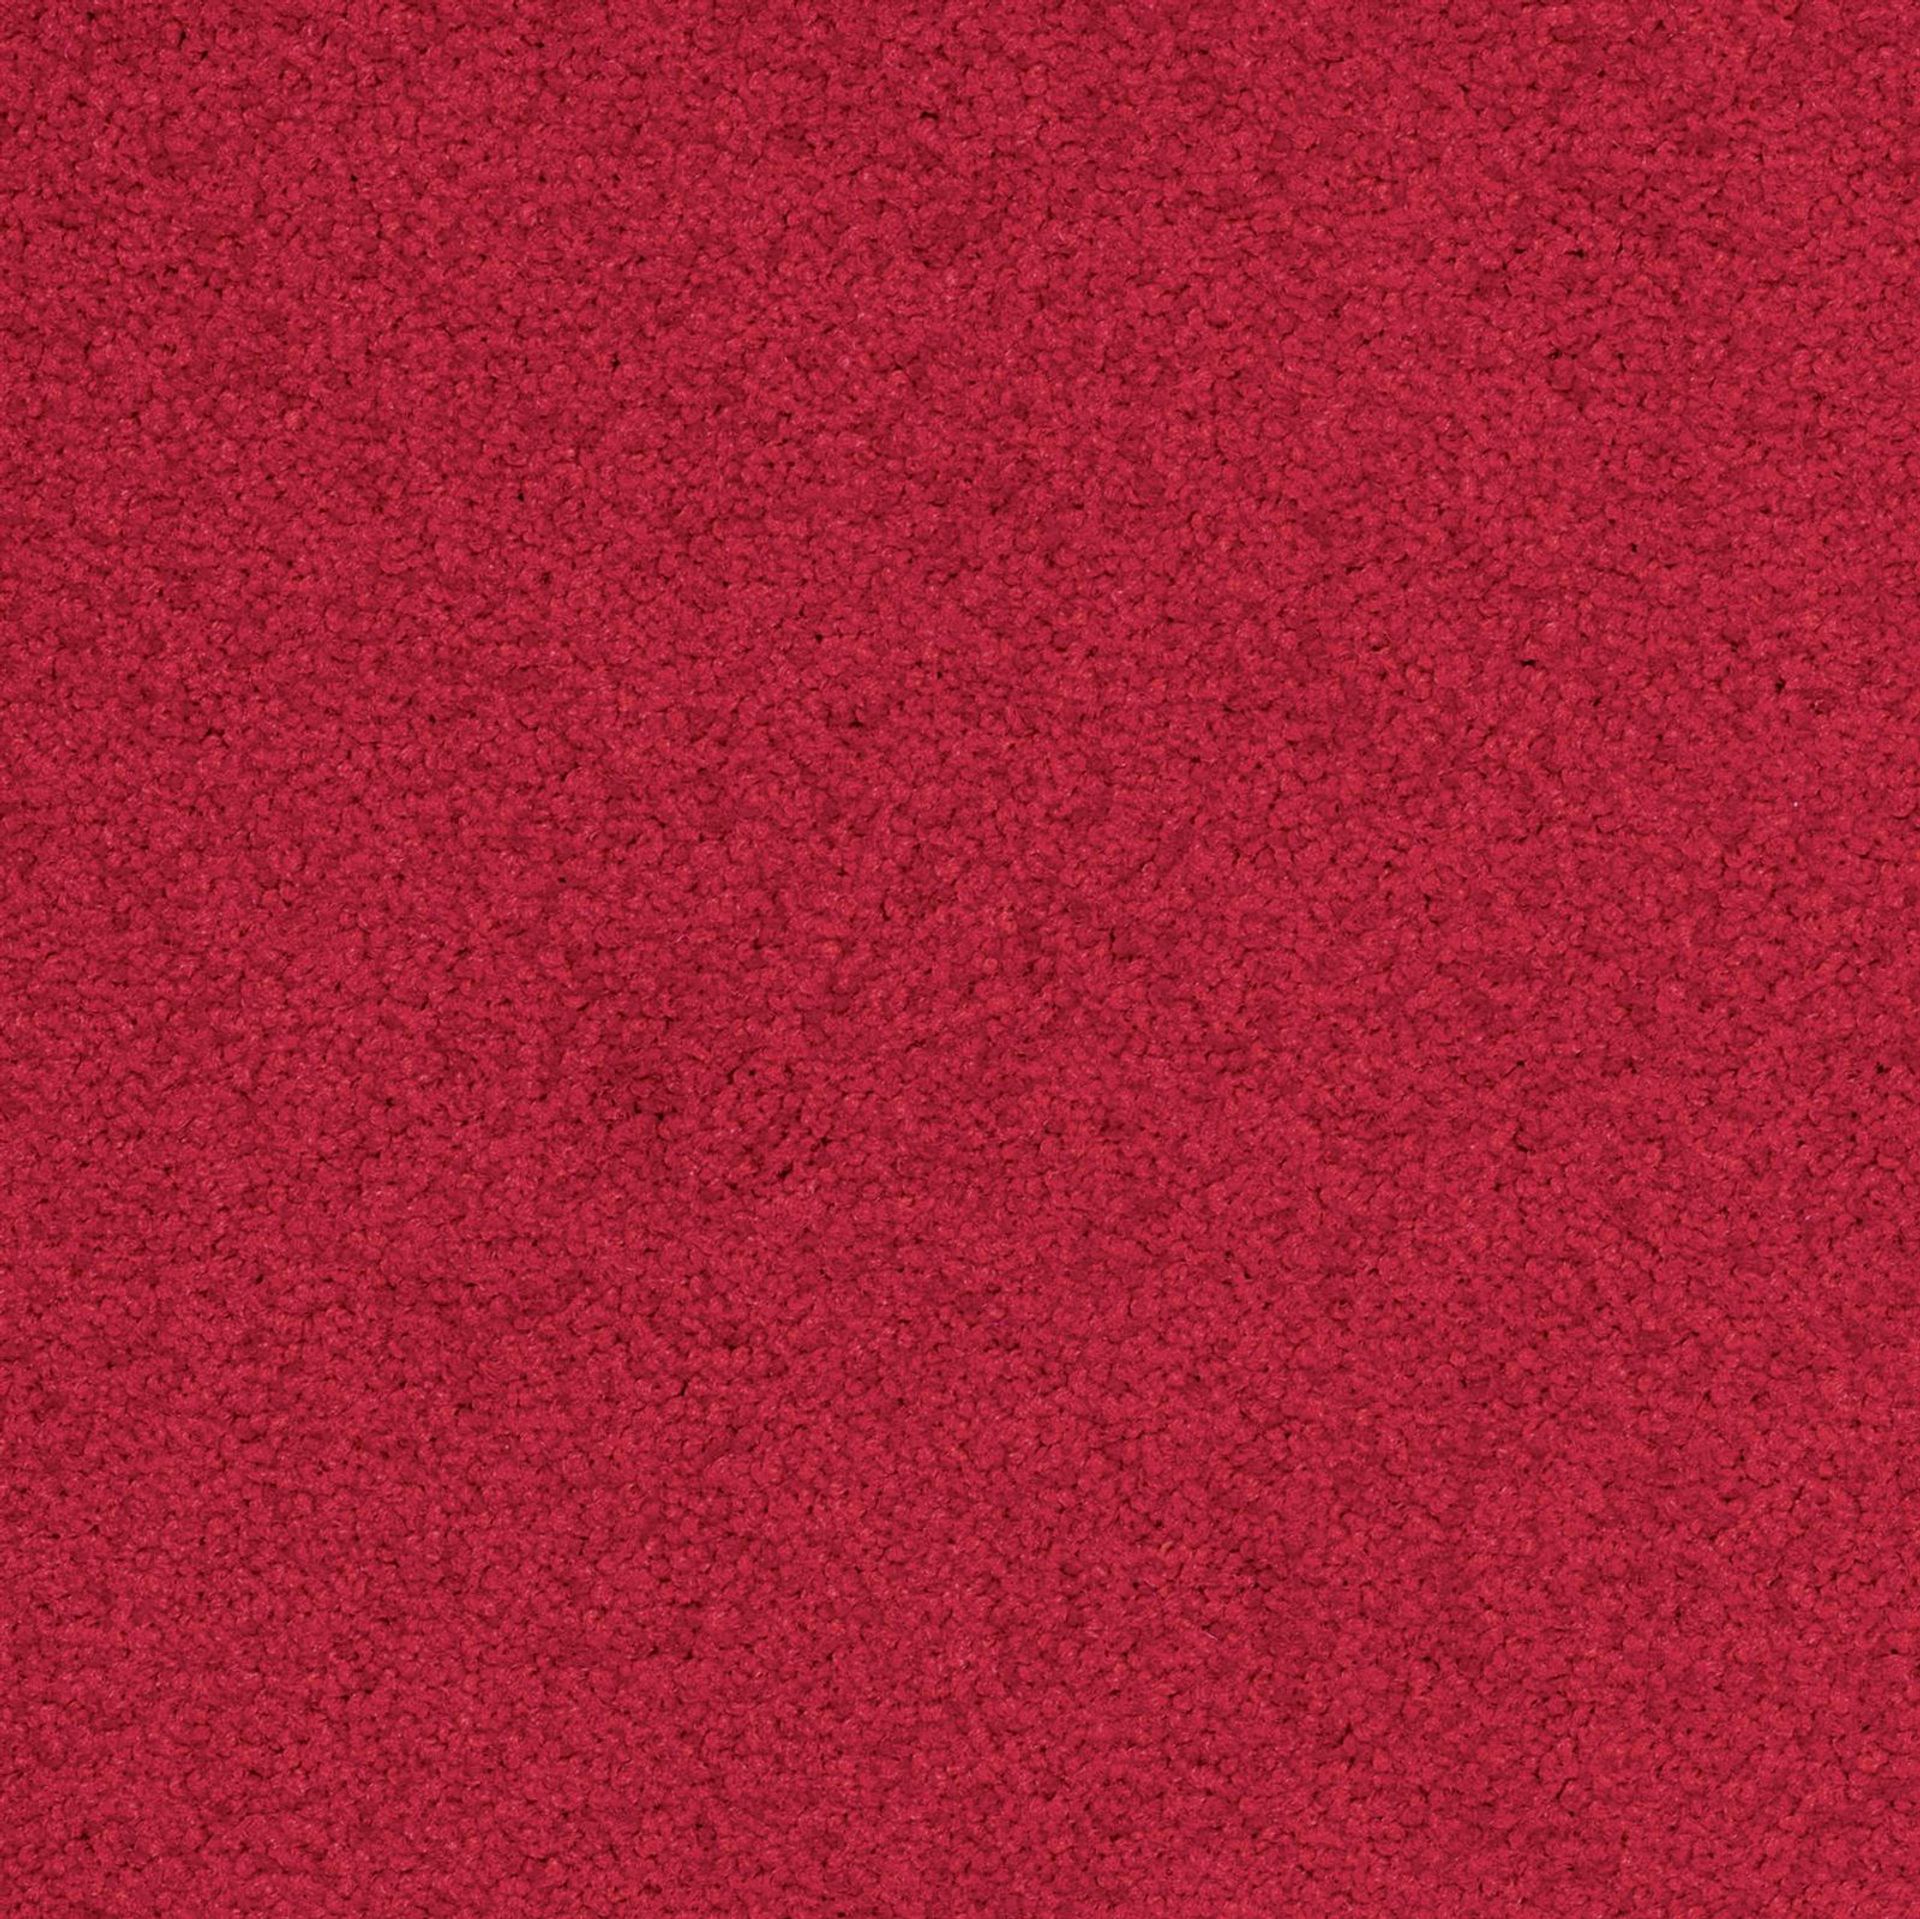 Teppichfliese 50 x 50 cm Velours Desso Palatino A072 4301 Rot Allover